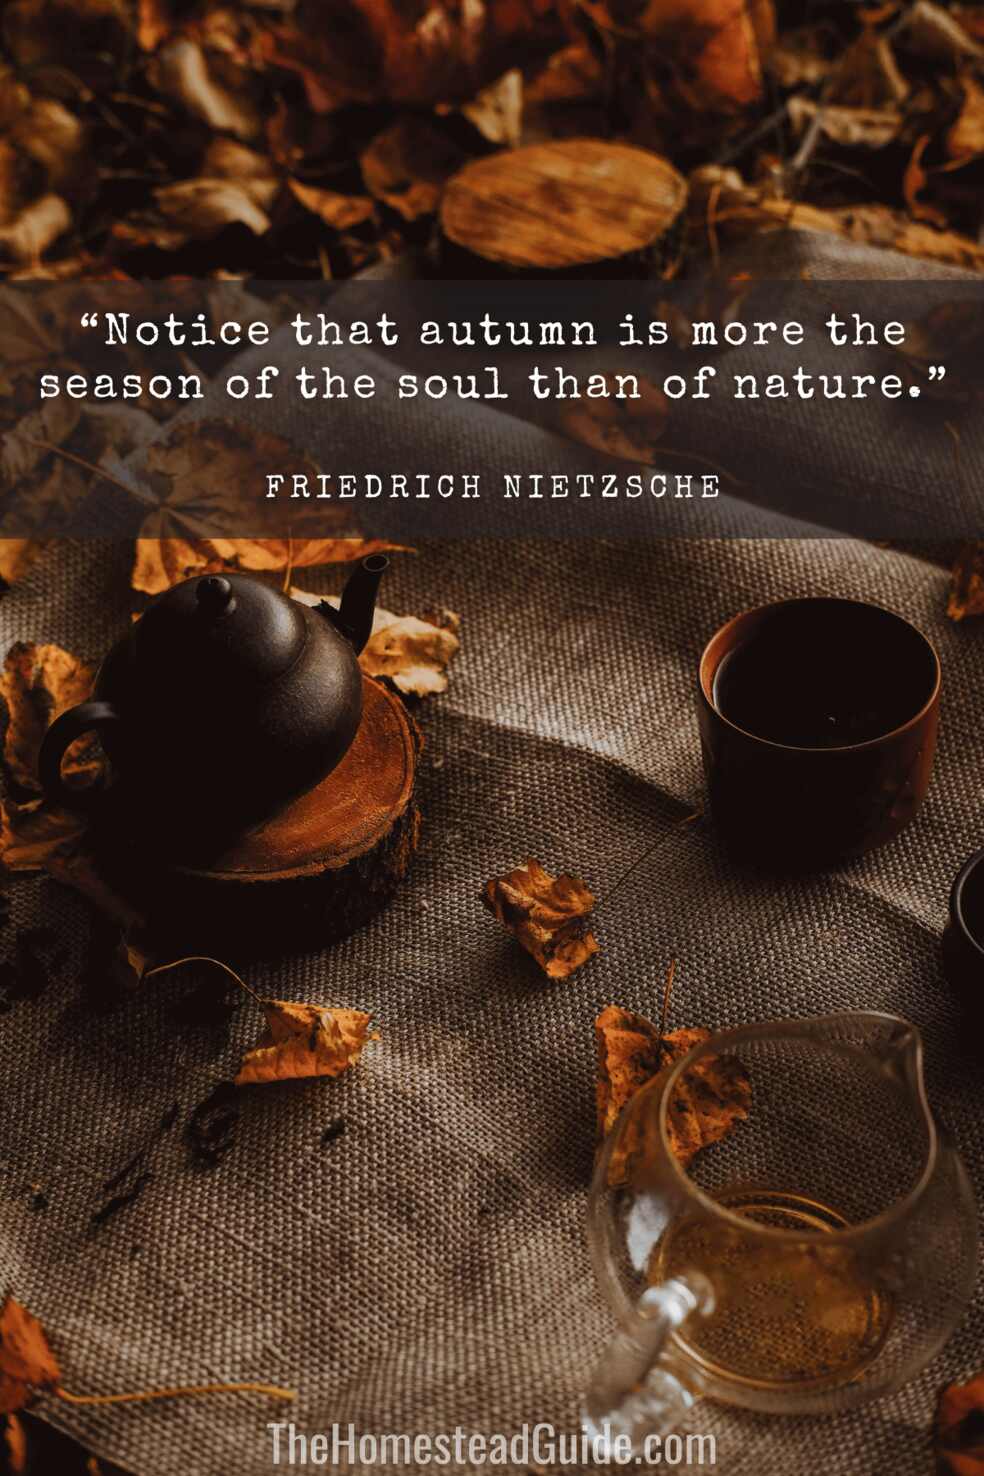 Notice that autumn is more the season of the soul than of nature.